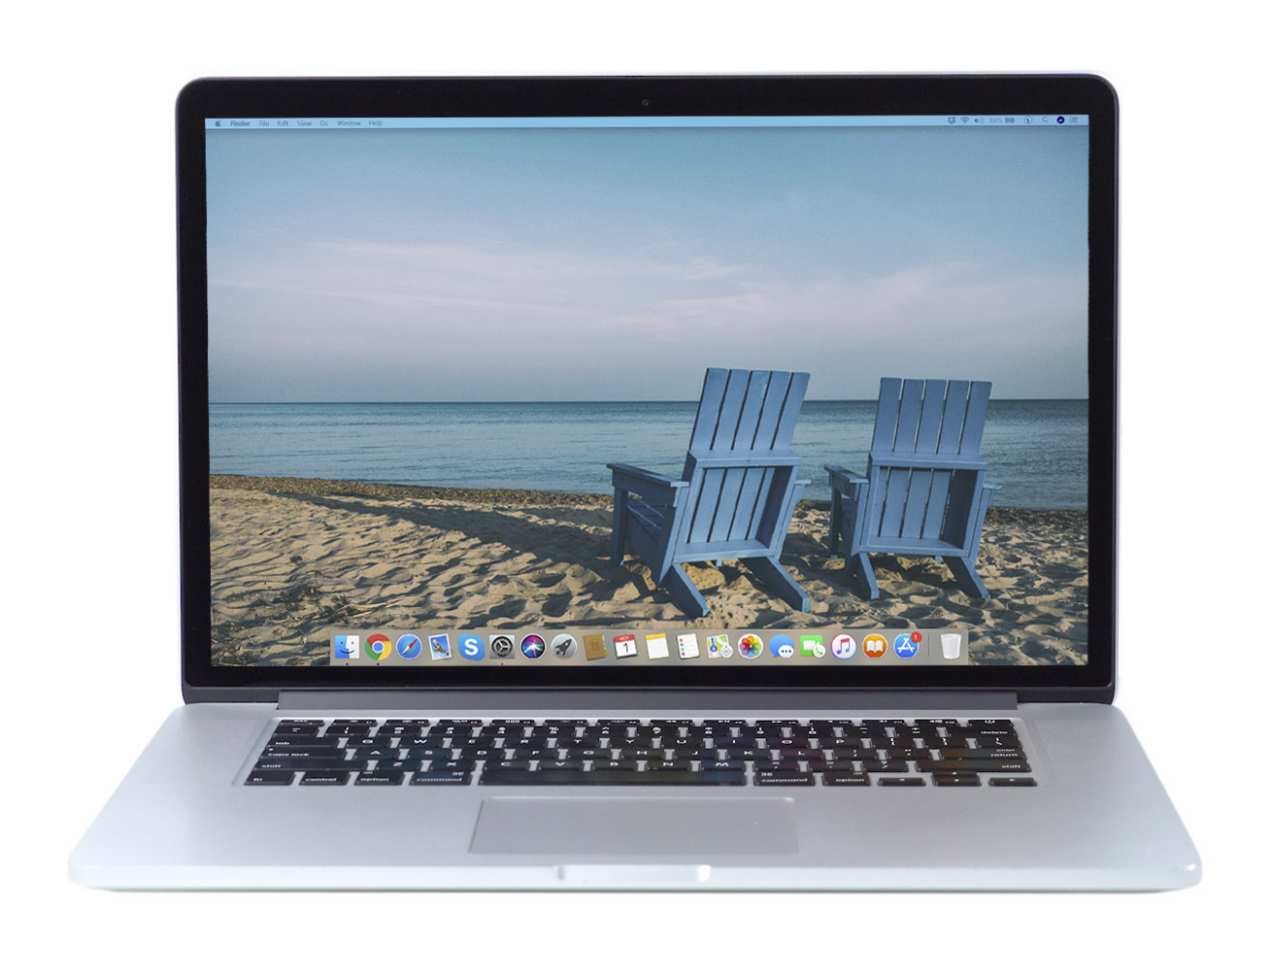 Refurbished & Used MacBook Pro 2012 for Sale | 15 inch & 13 inch MBP